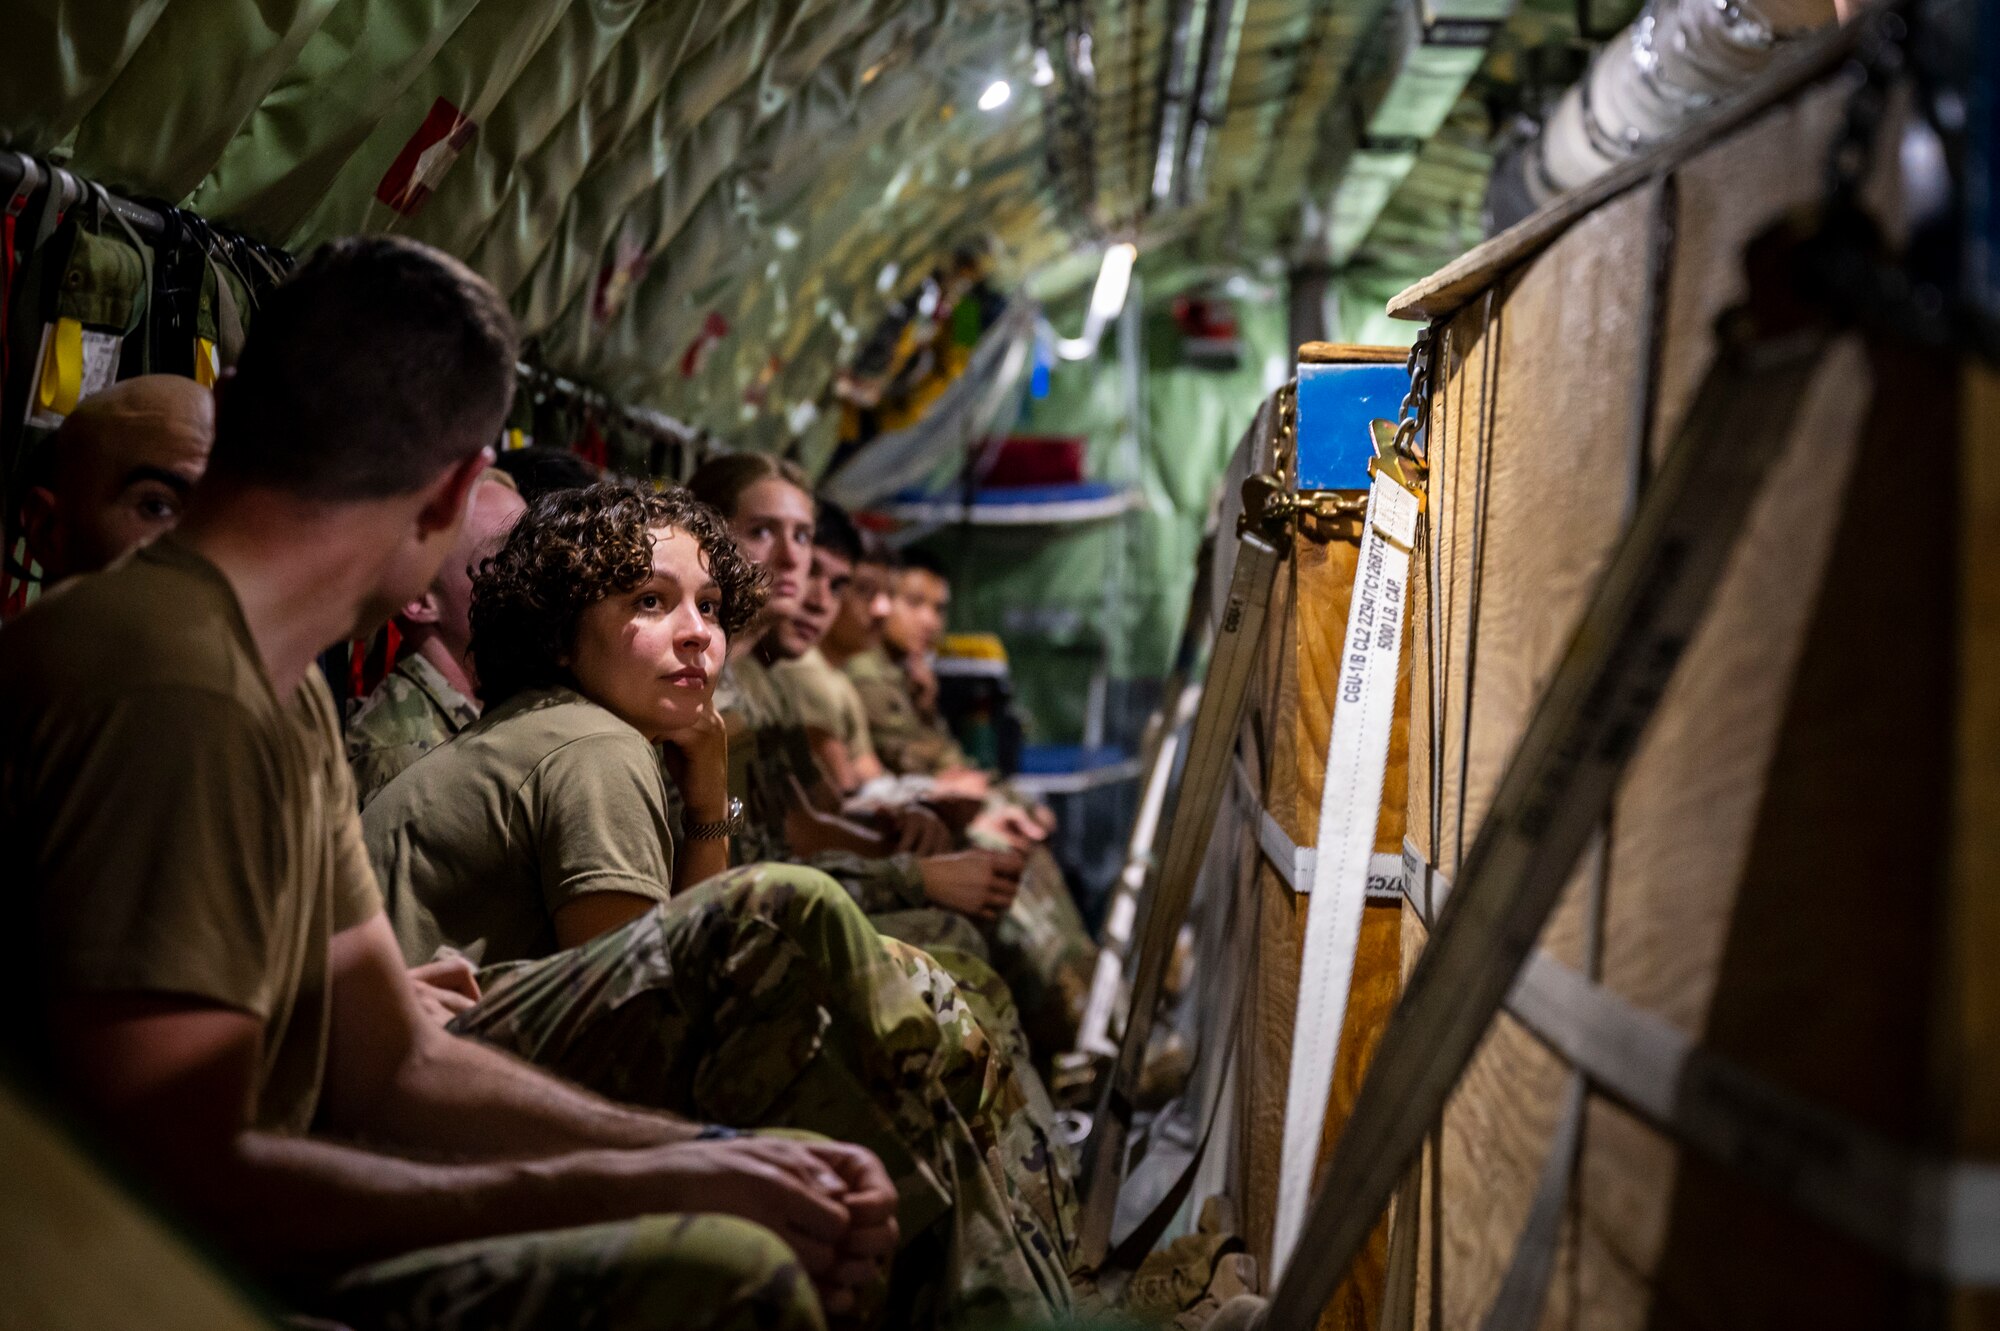 Service members sitting in an aircraft